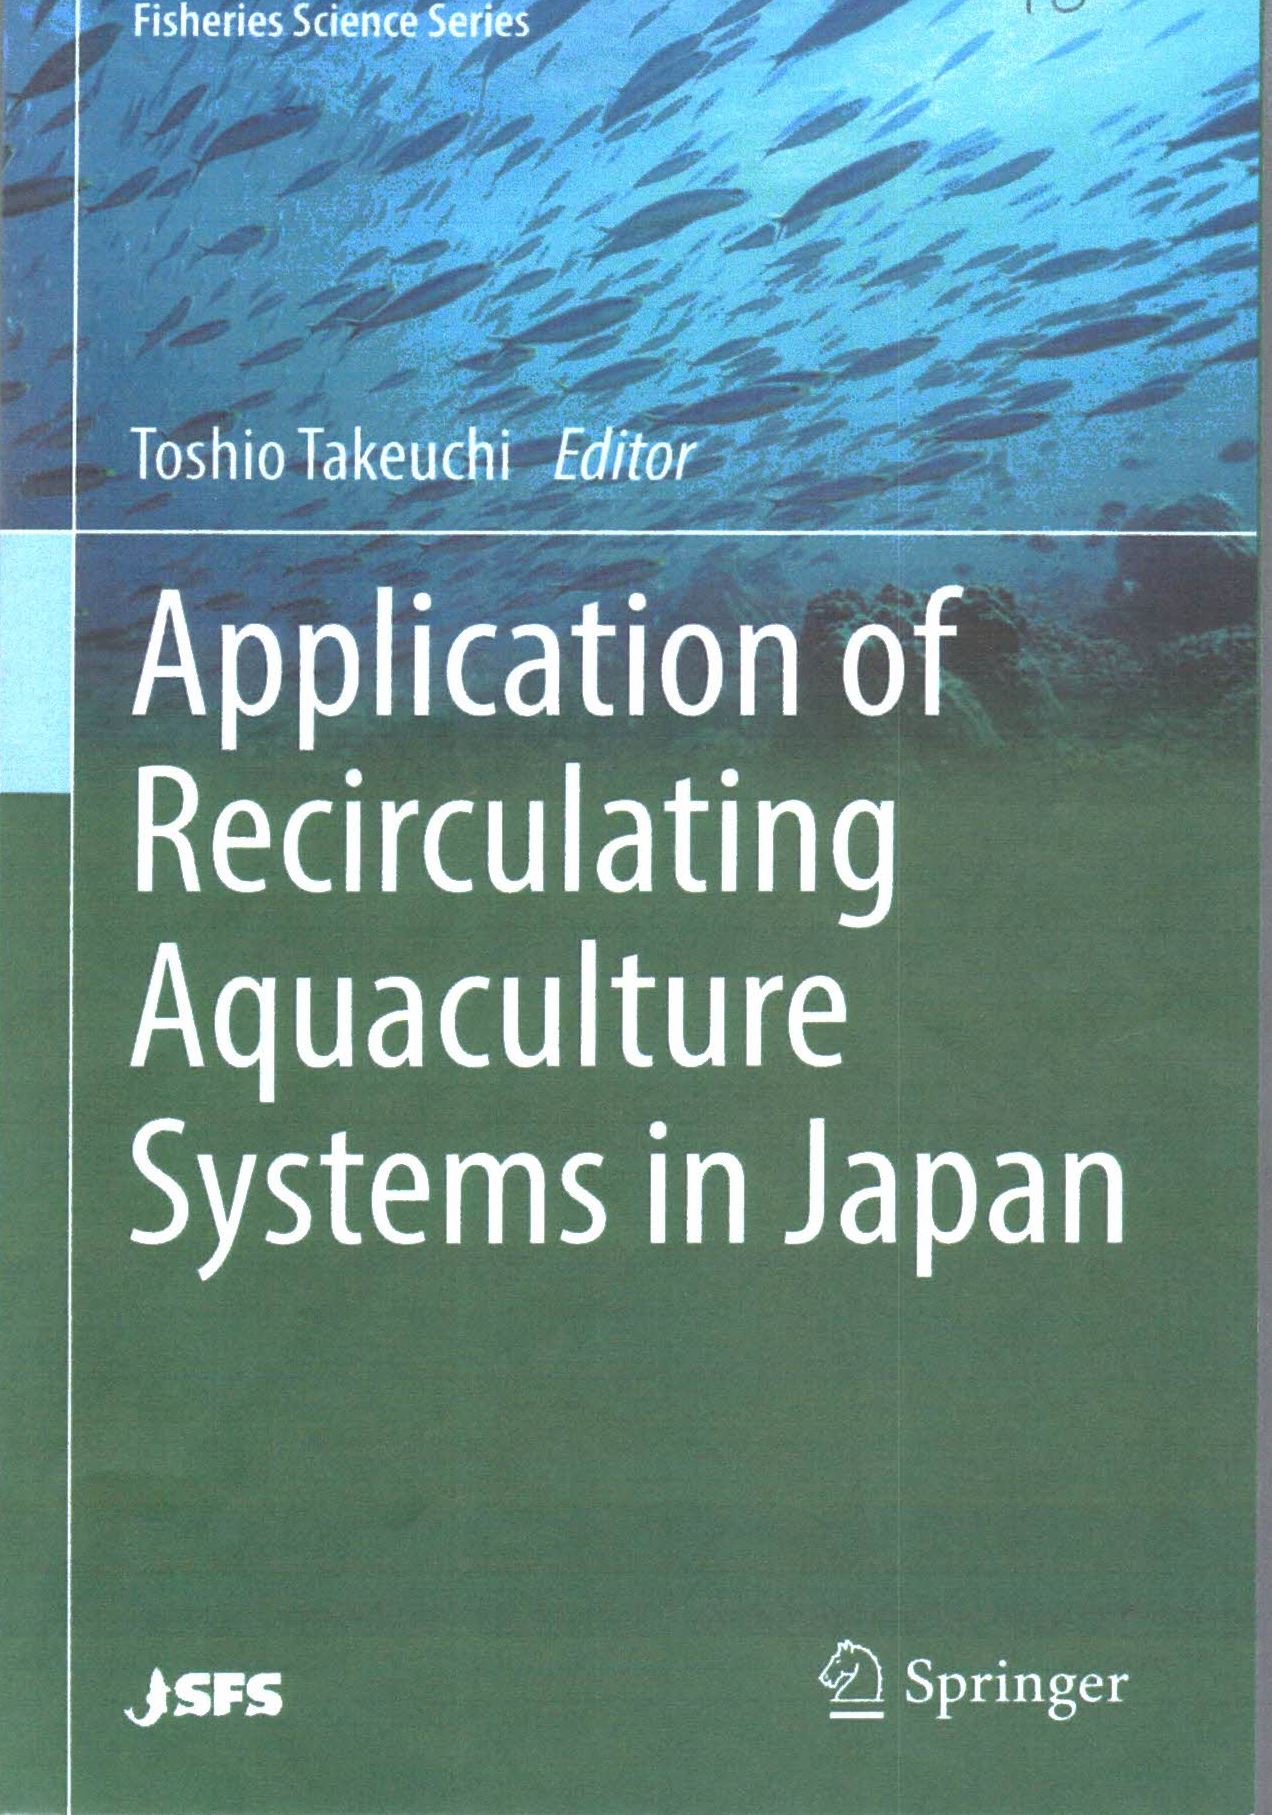 Application of Recirculating Aquaculture systems in Japan